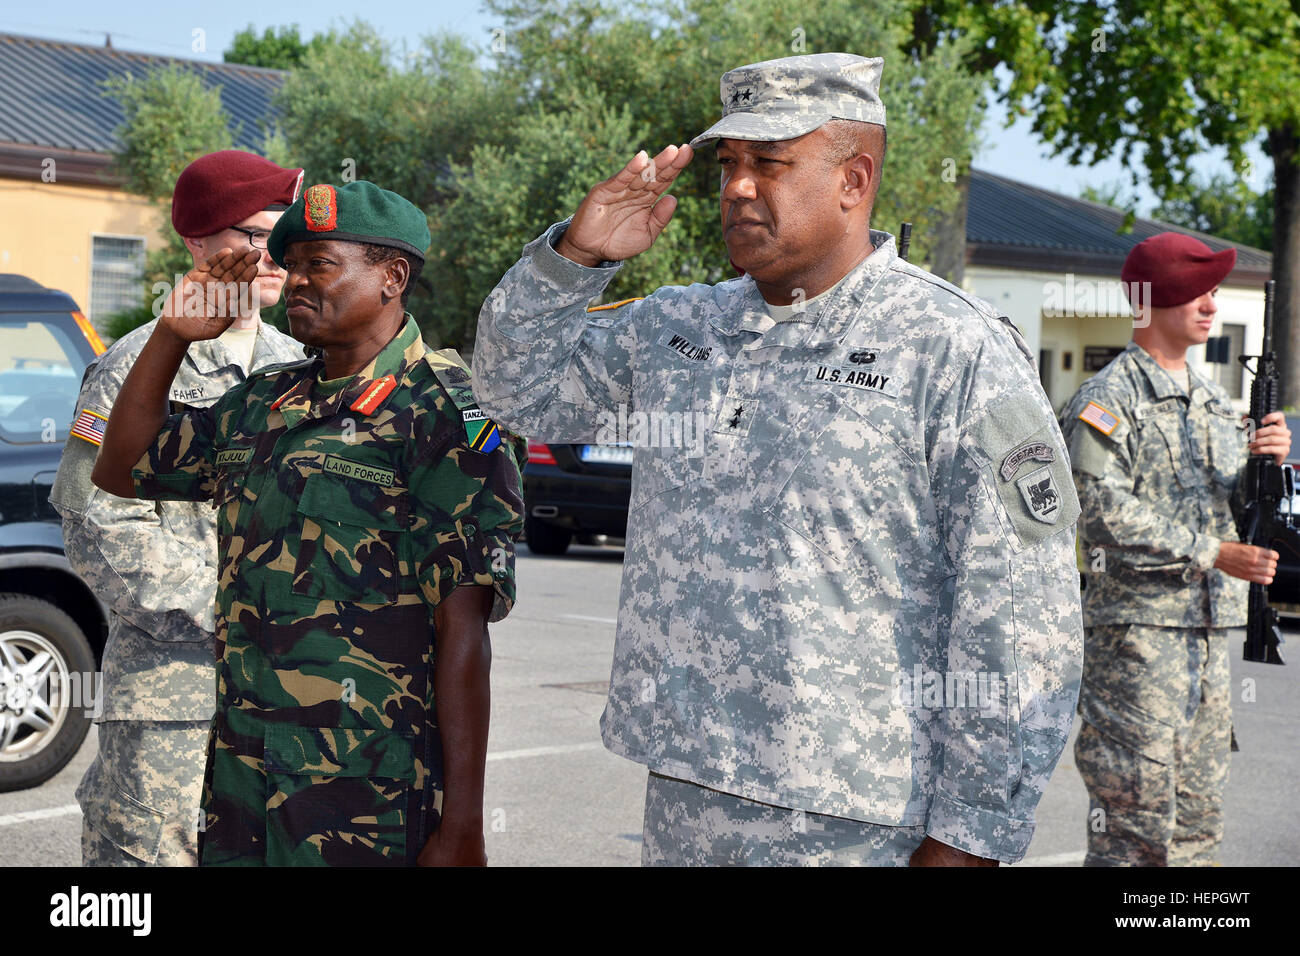 Major General Salim Mustafa Kijuu, Land Forces commander Tanzania People’s Defence Force, with Maj. Gen. Darryl A. Williams, U.S. Army Africa commanding general, during visit at Caserma Ederle in Vicenza, Italy, July 7, 2015. (Photo by Visual Information Specialist  Paolo Bovo) Maj. Gen. Salim Mustafa Kijuu visits at Caserma Ederle in Vicenza, Italy, July 7,2015 150707-A-JM436-049 Stock Photo